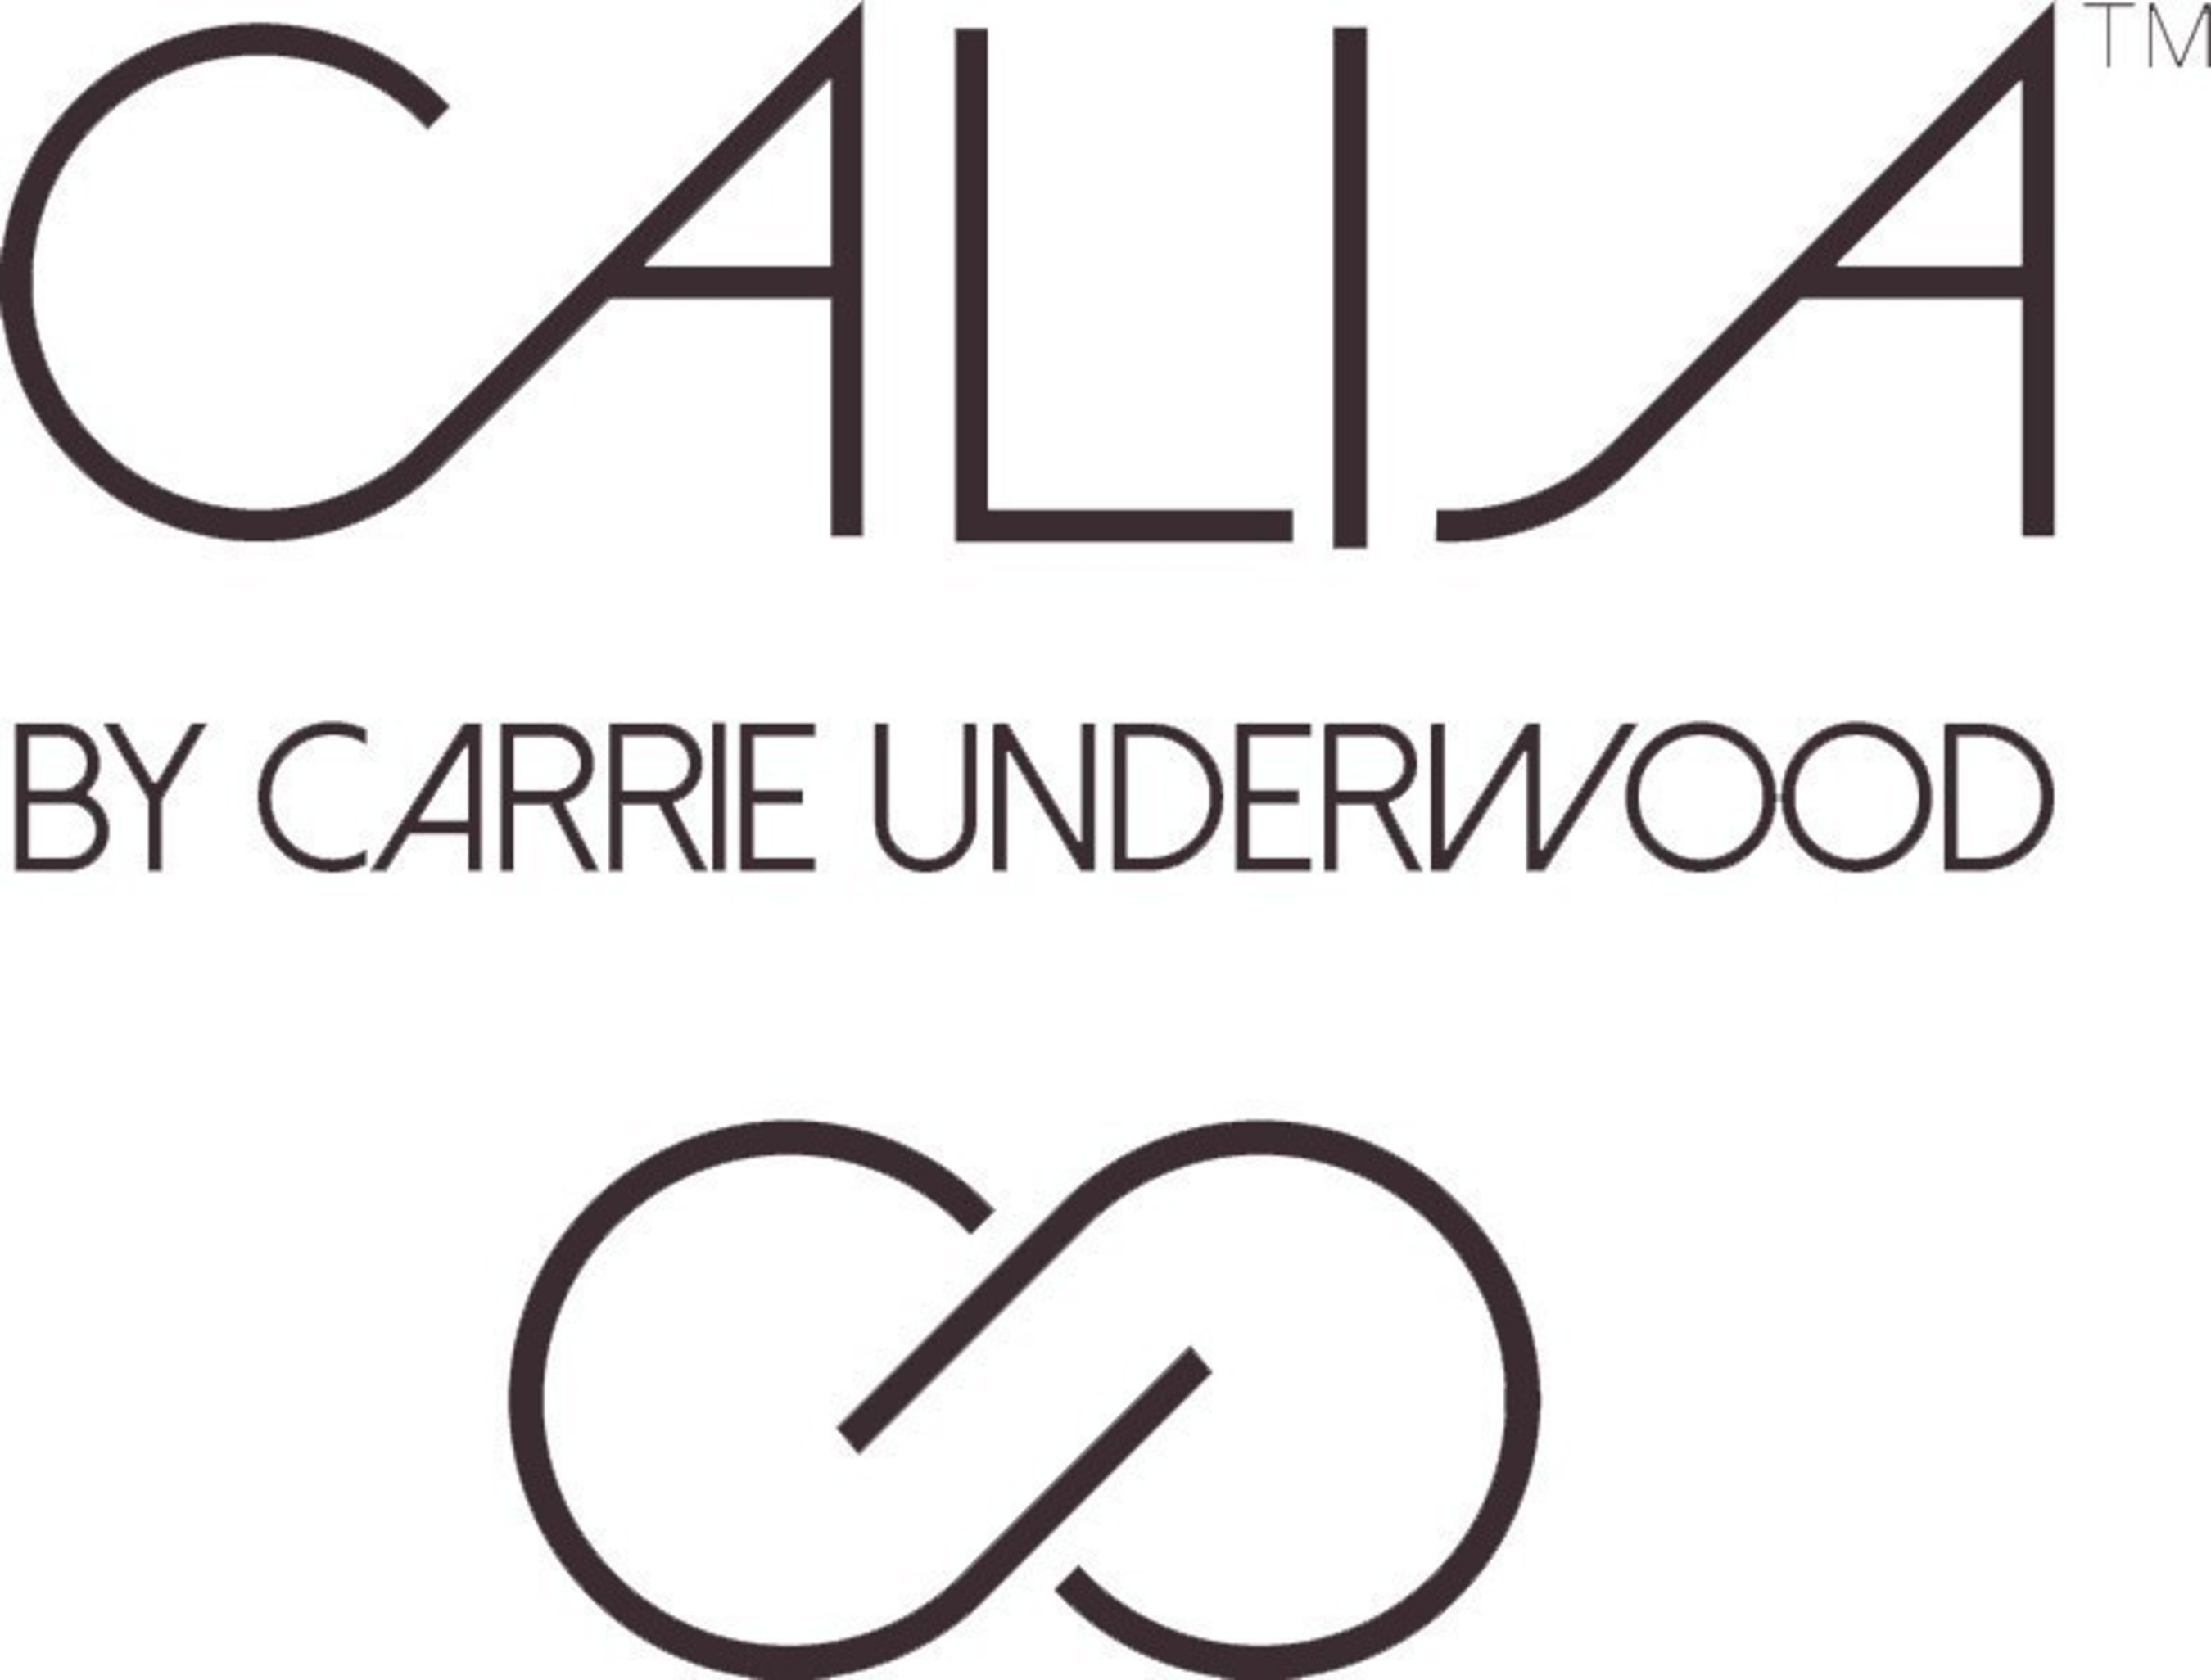 CALIA by Carrie Underwood